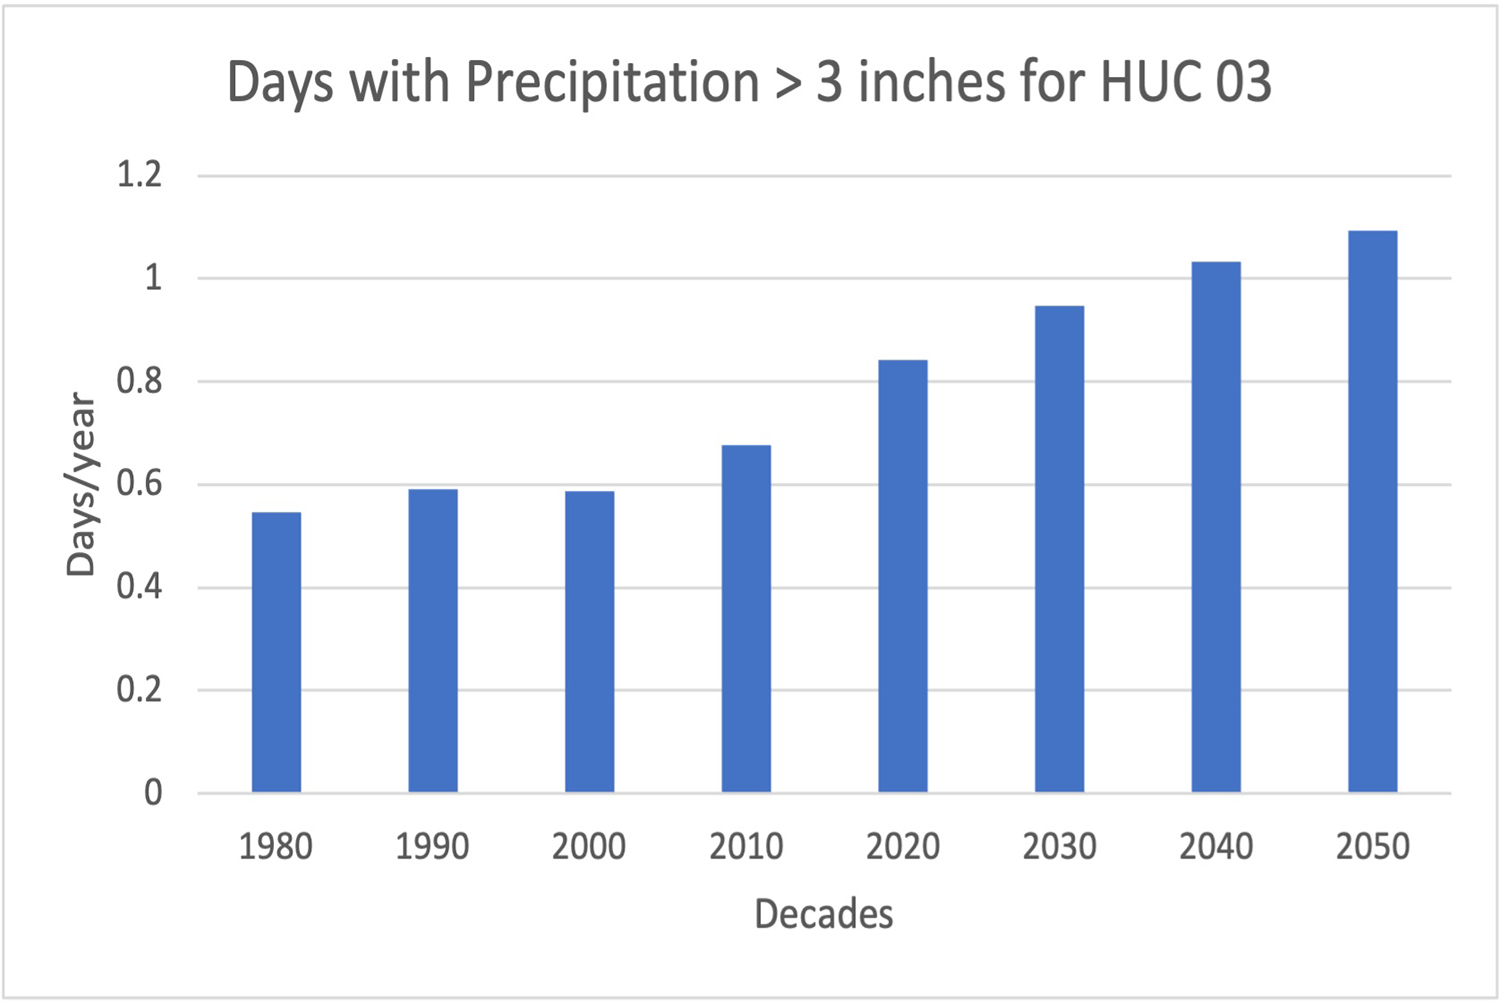 Bar graph of decade averages from 1980 to 2050 of days per year with precipitation greater than 3 inches for the South Atlantic–Gulf States. Days per year increase every decade.